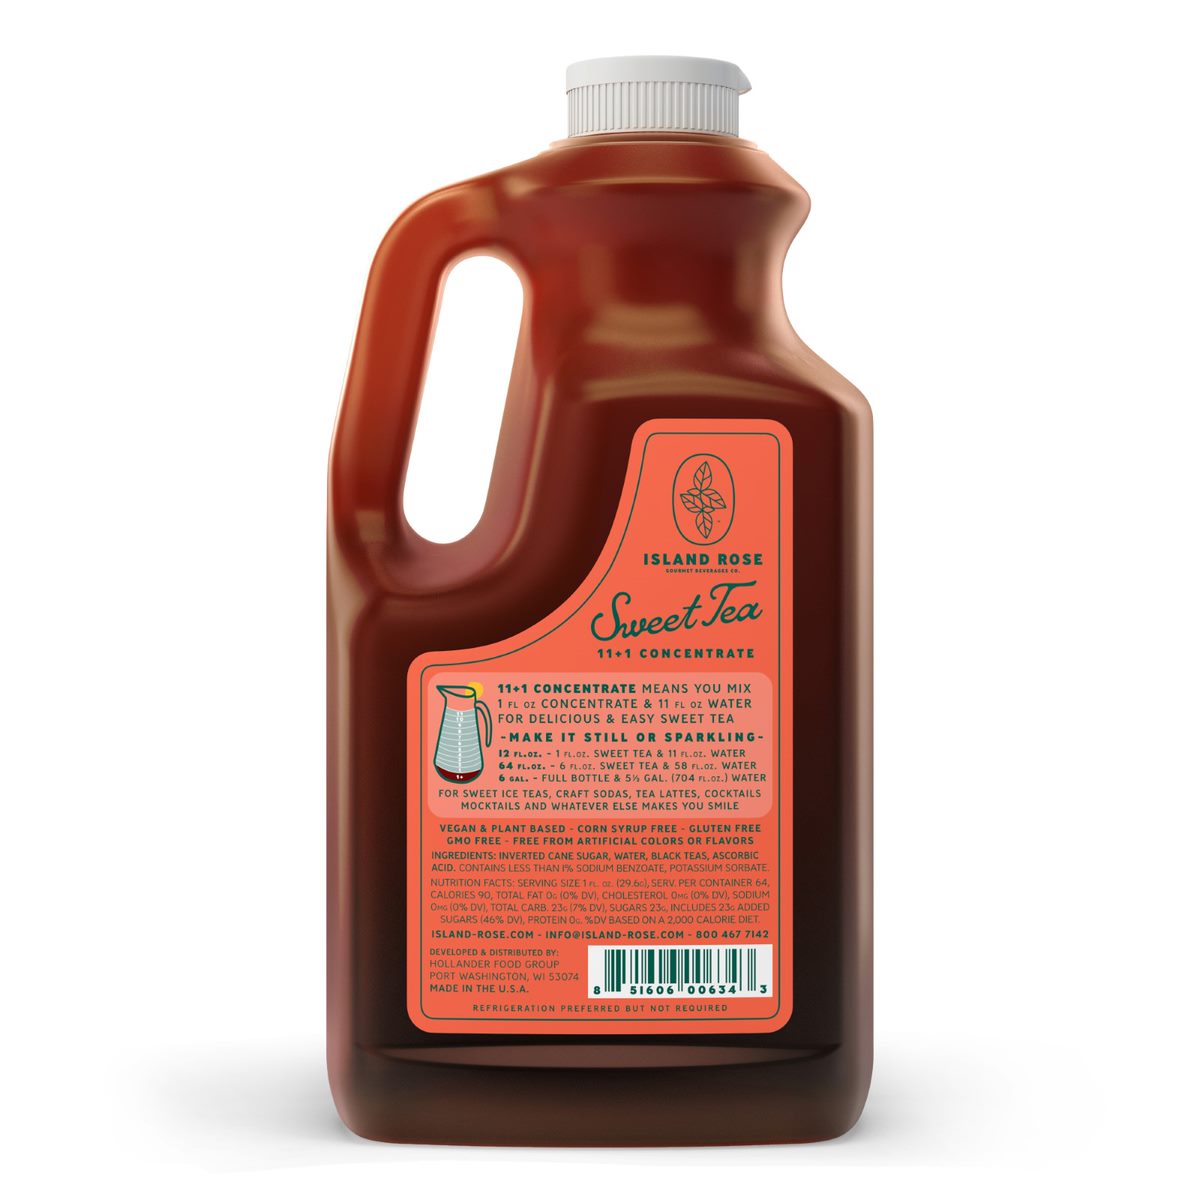 Island Rose Gourmet Tea - 64oz Plastic Bottle: Southern Style Sweet Tea Concentrate